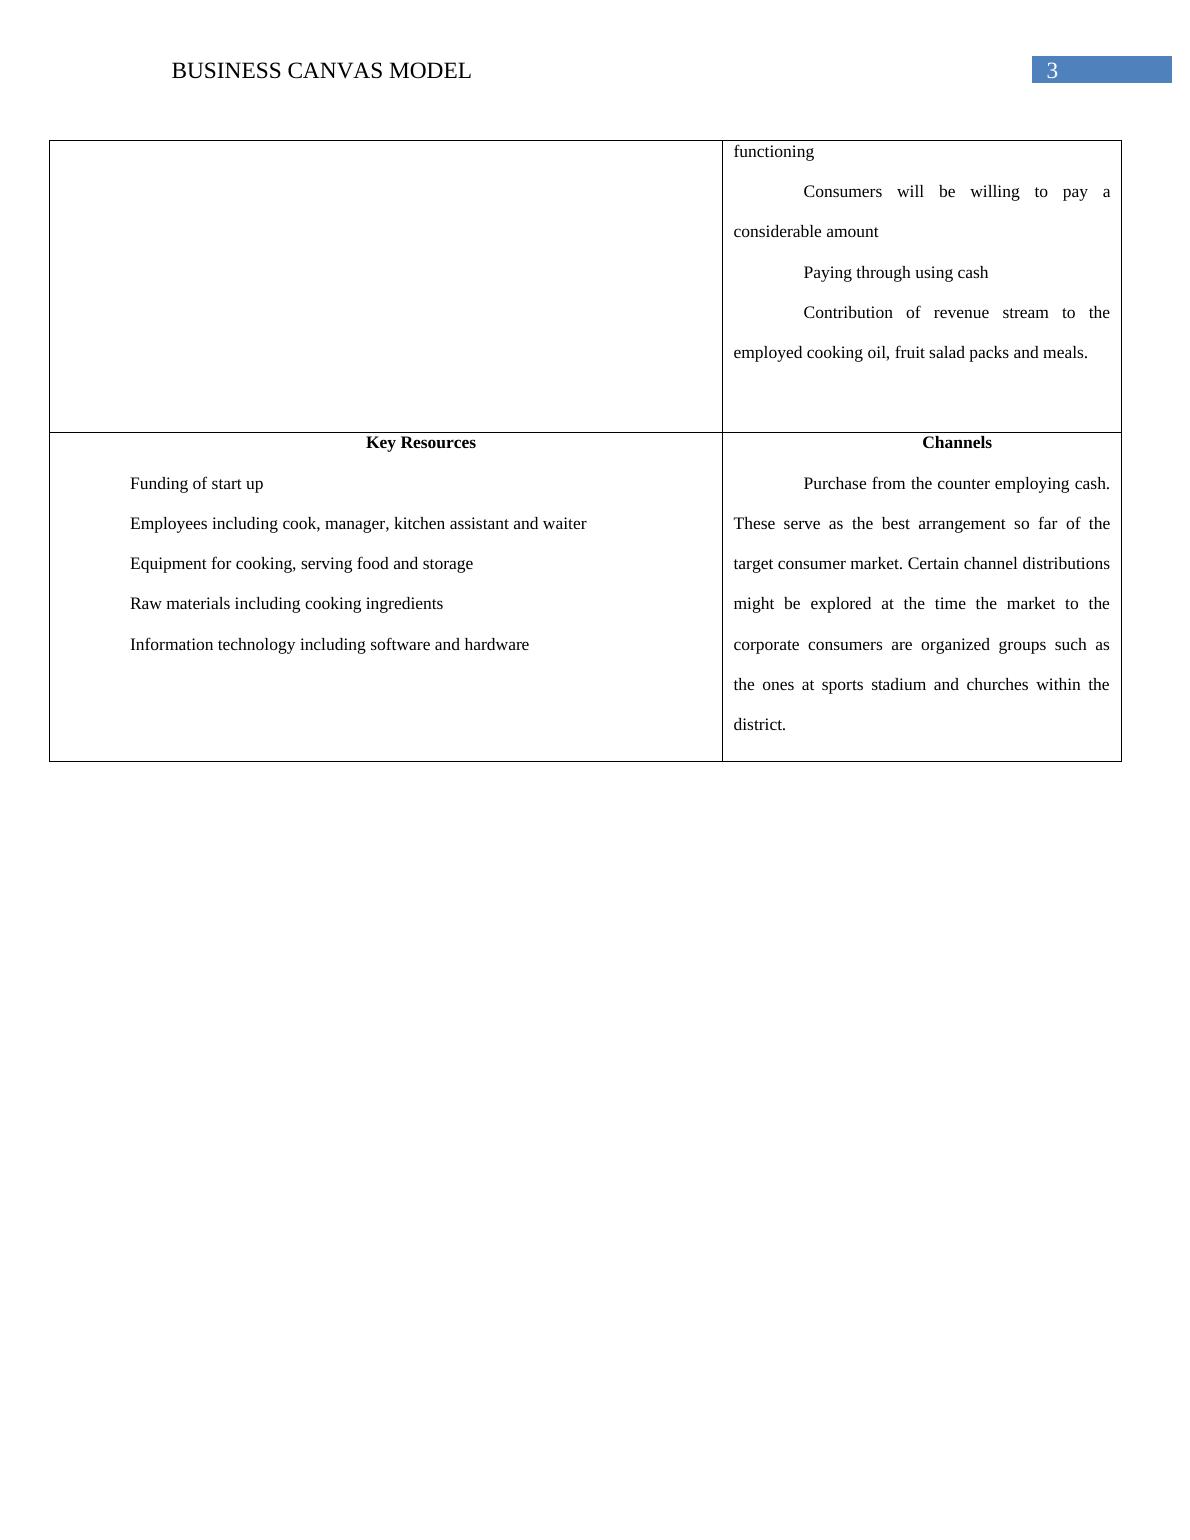 Report on Business Canvas Model_4